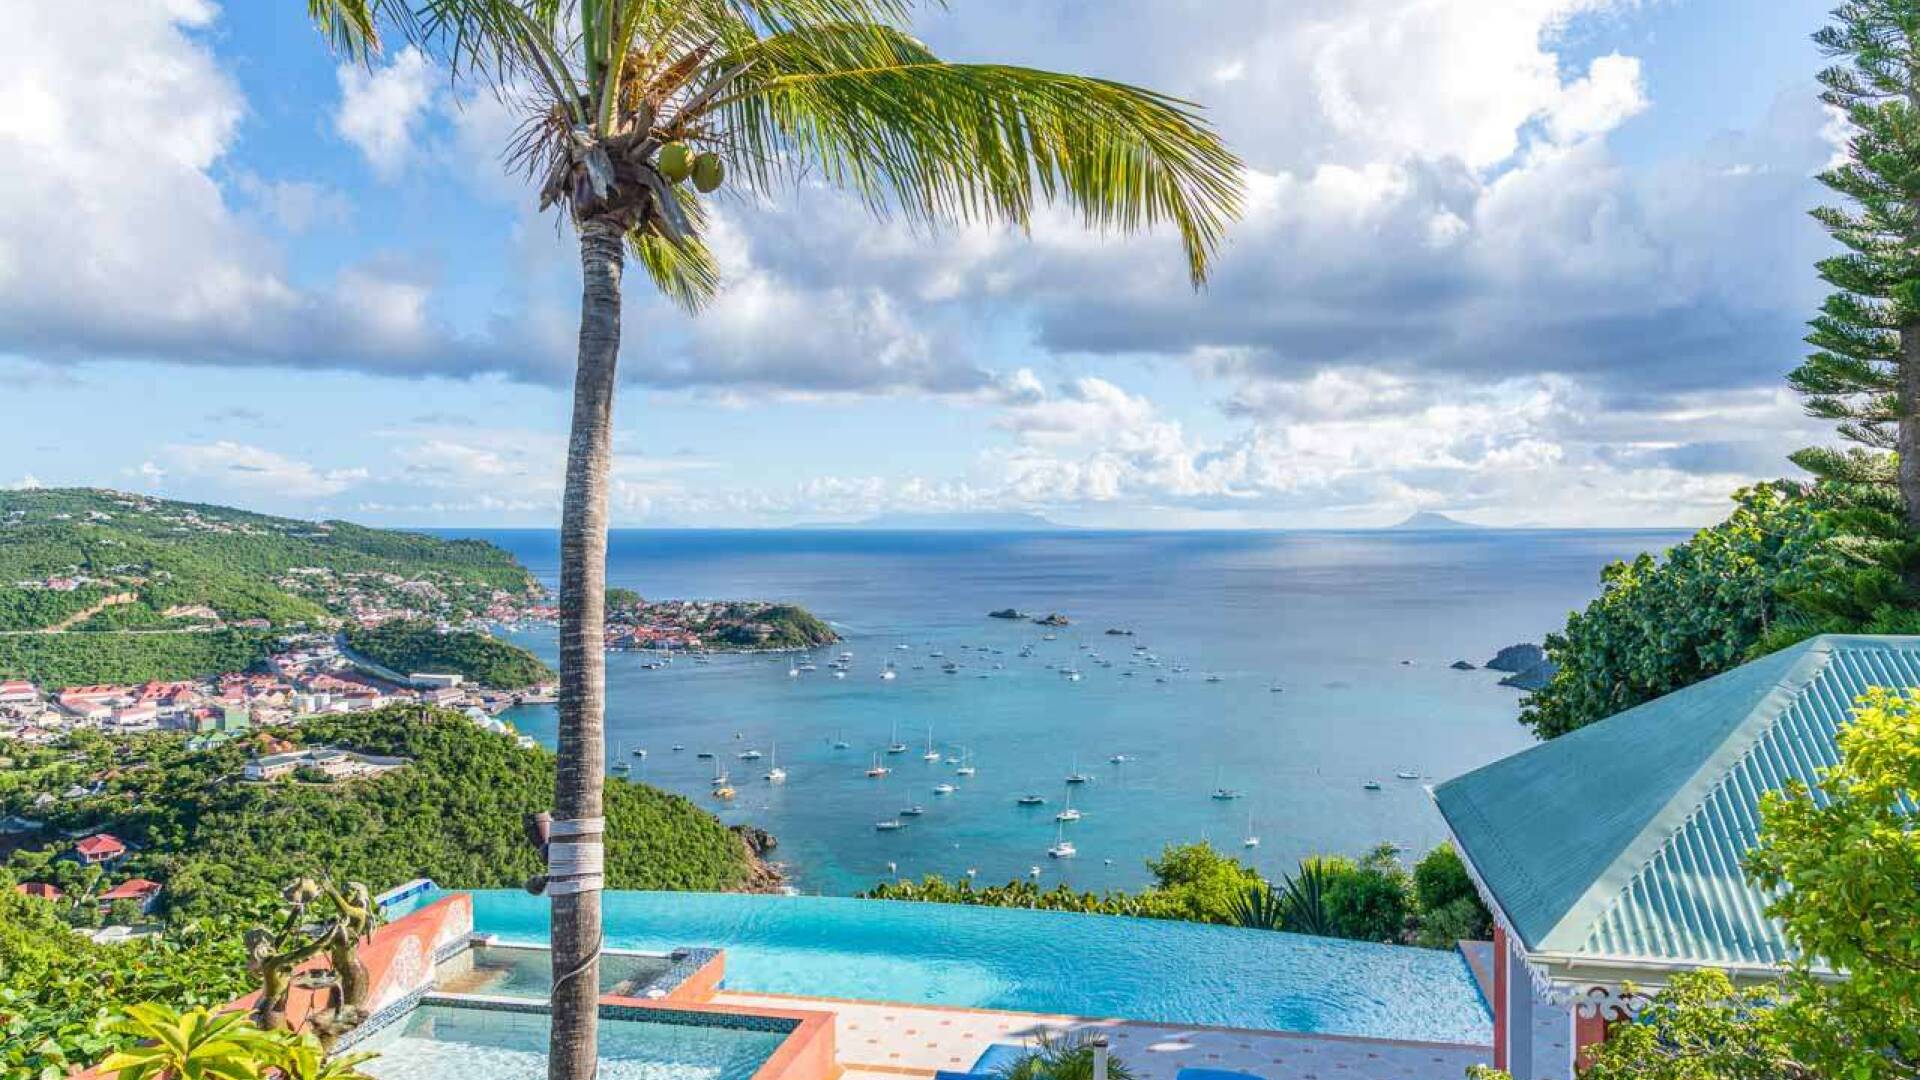 The view from WV MGO, Colombier, St. Barthelemy